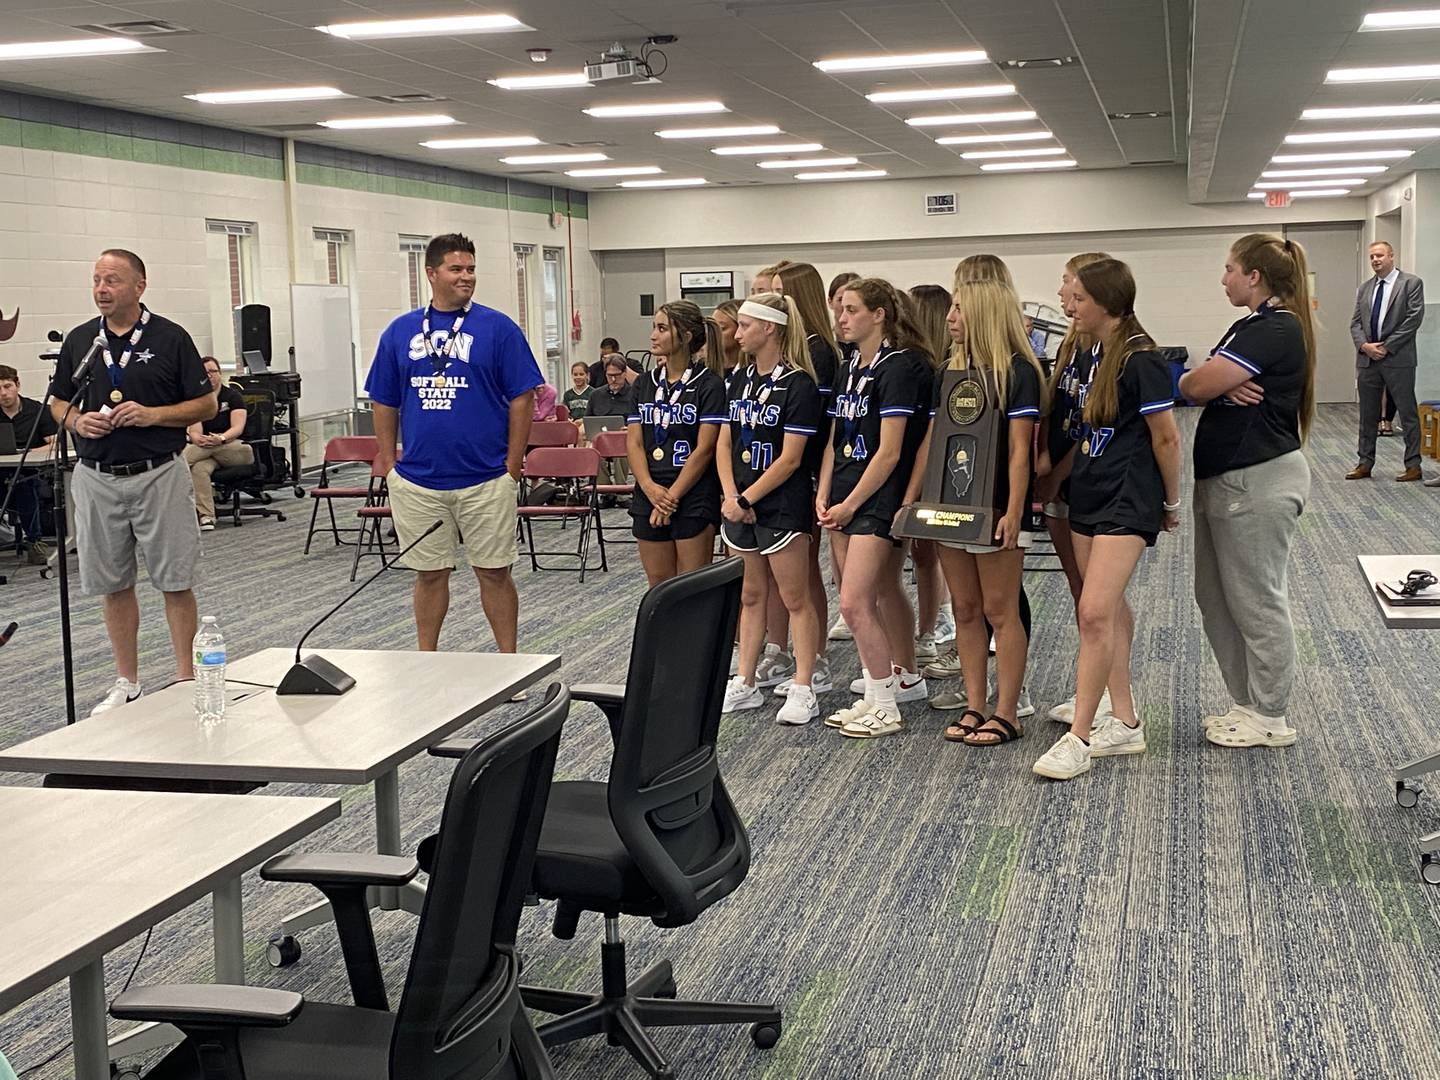 St. Charles North High School softball coaches Tom Poulin, left, and Thijs Dennison, right, along with the St. Charles North softball team celebrate the team's first state title during Monday's St. Charles School Board meeting.